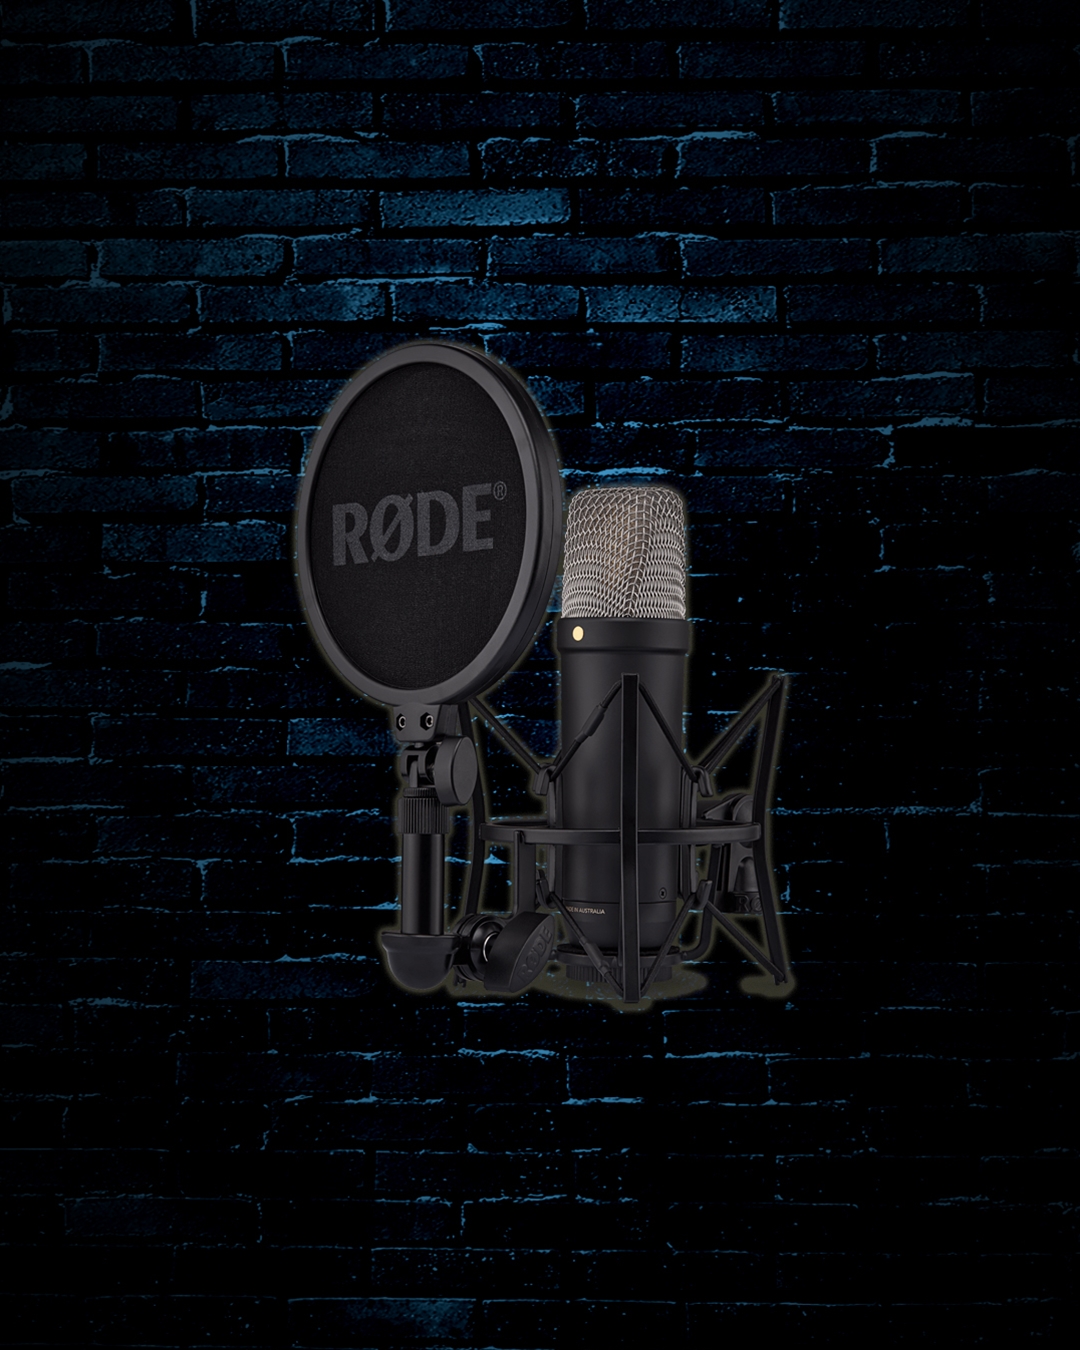 RODE NT1 5th Generation Silver Microphone